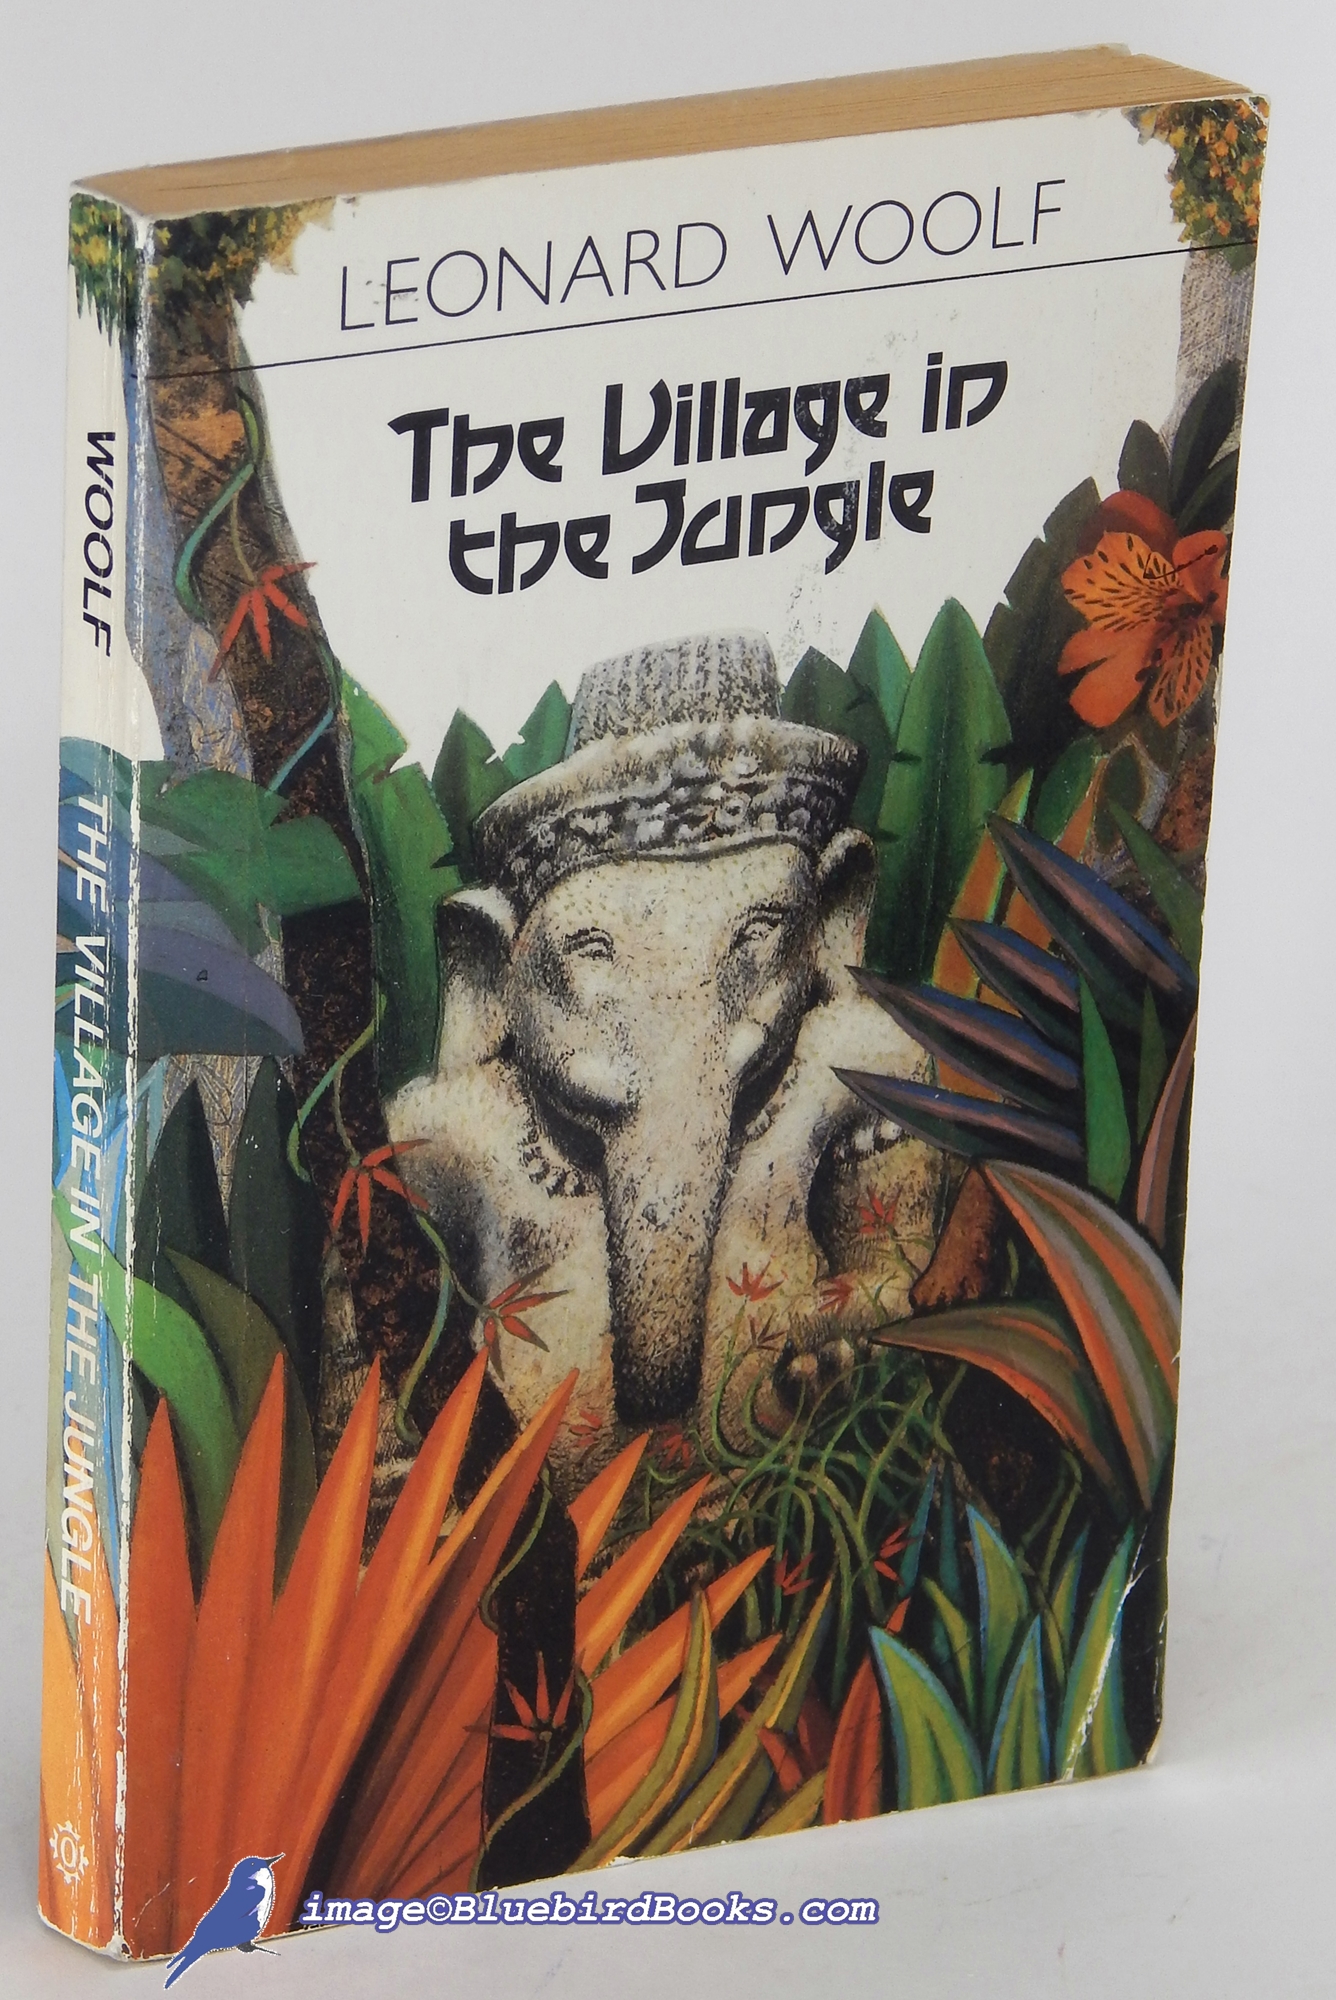 WOOLF, LEONARD - The Village in the Jungle